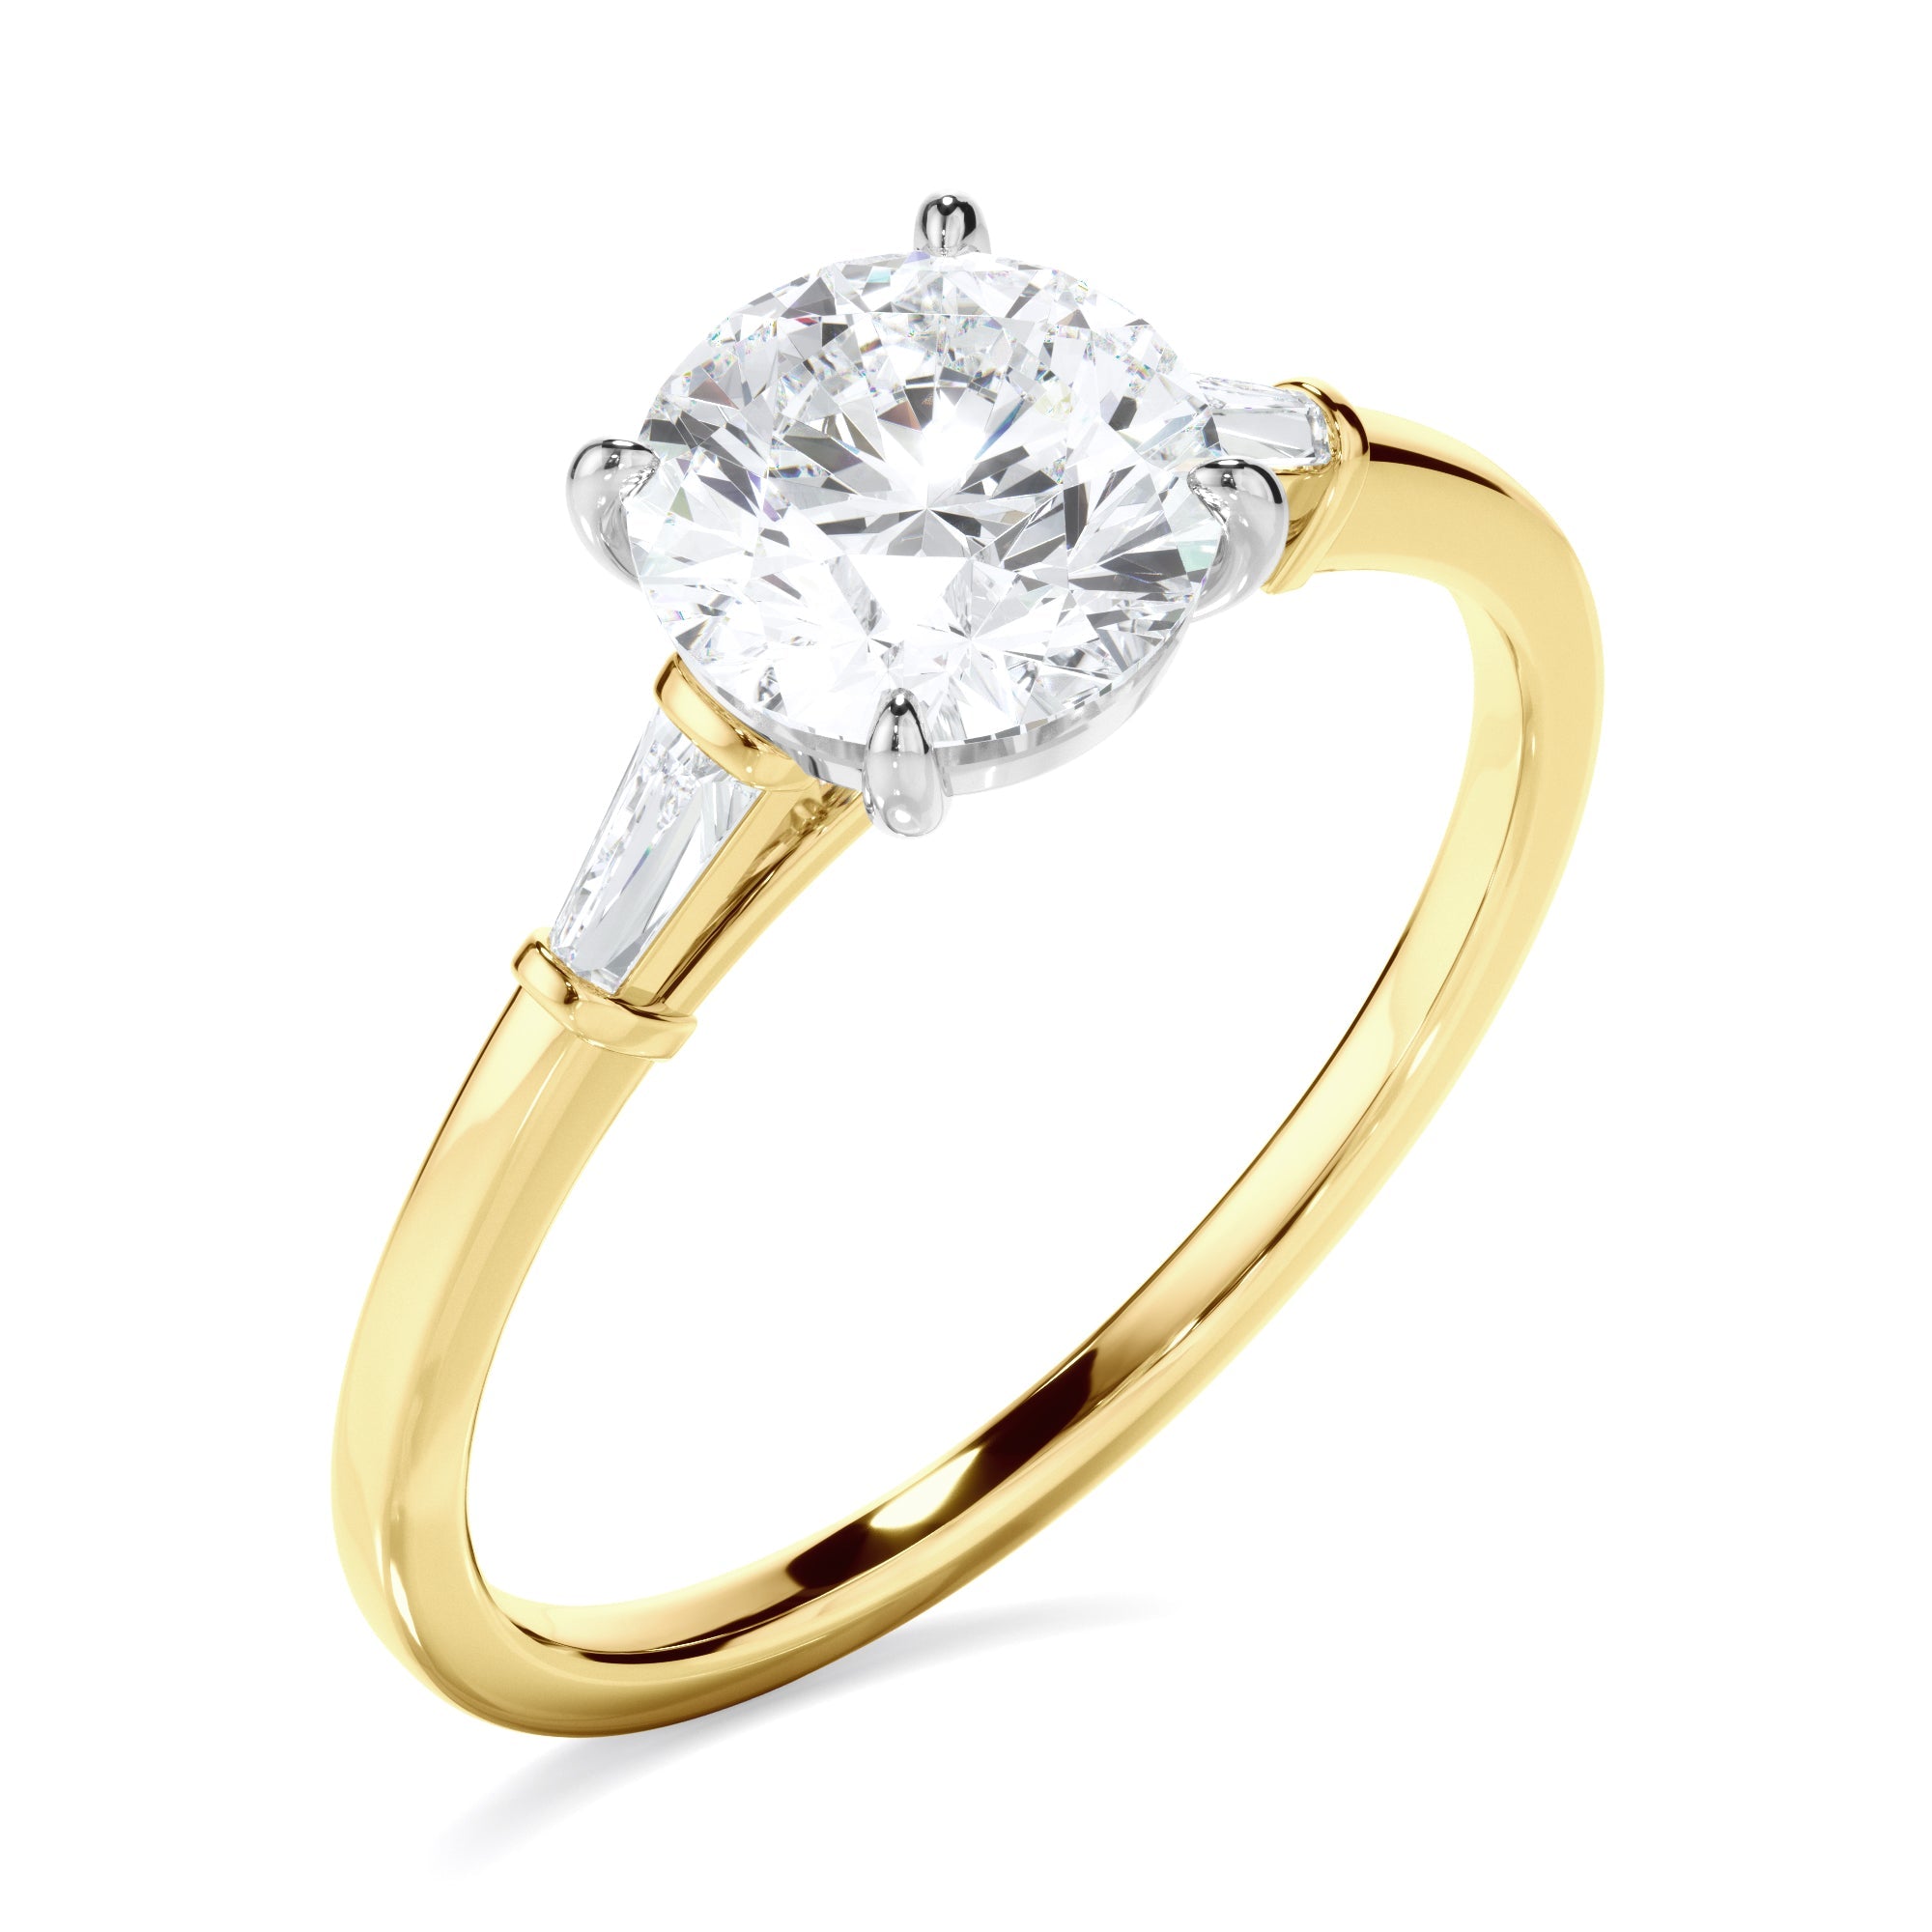 Round Brilliant Cut Diamond Engagement Ring With Baguette Sides